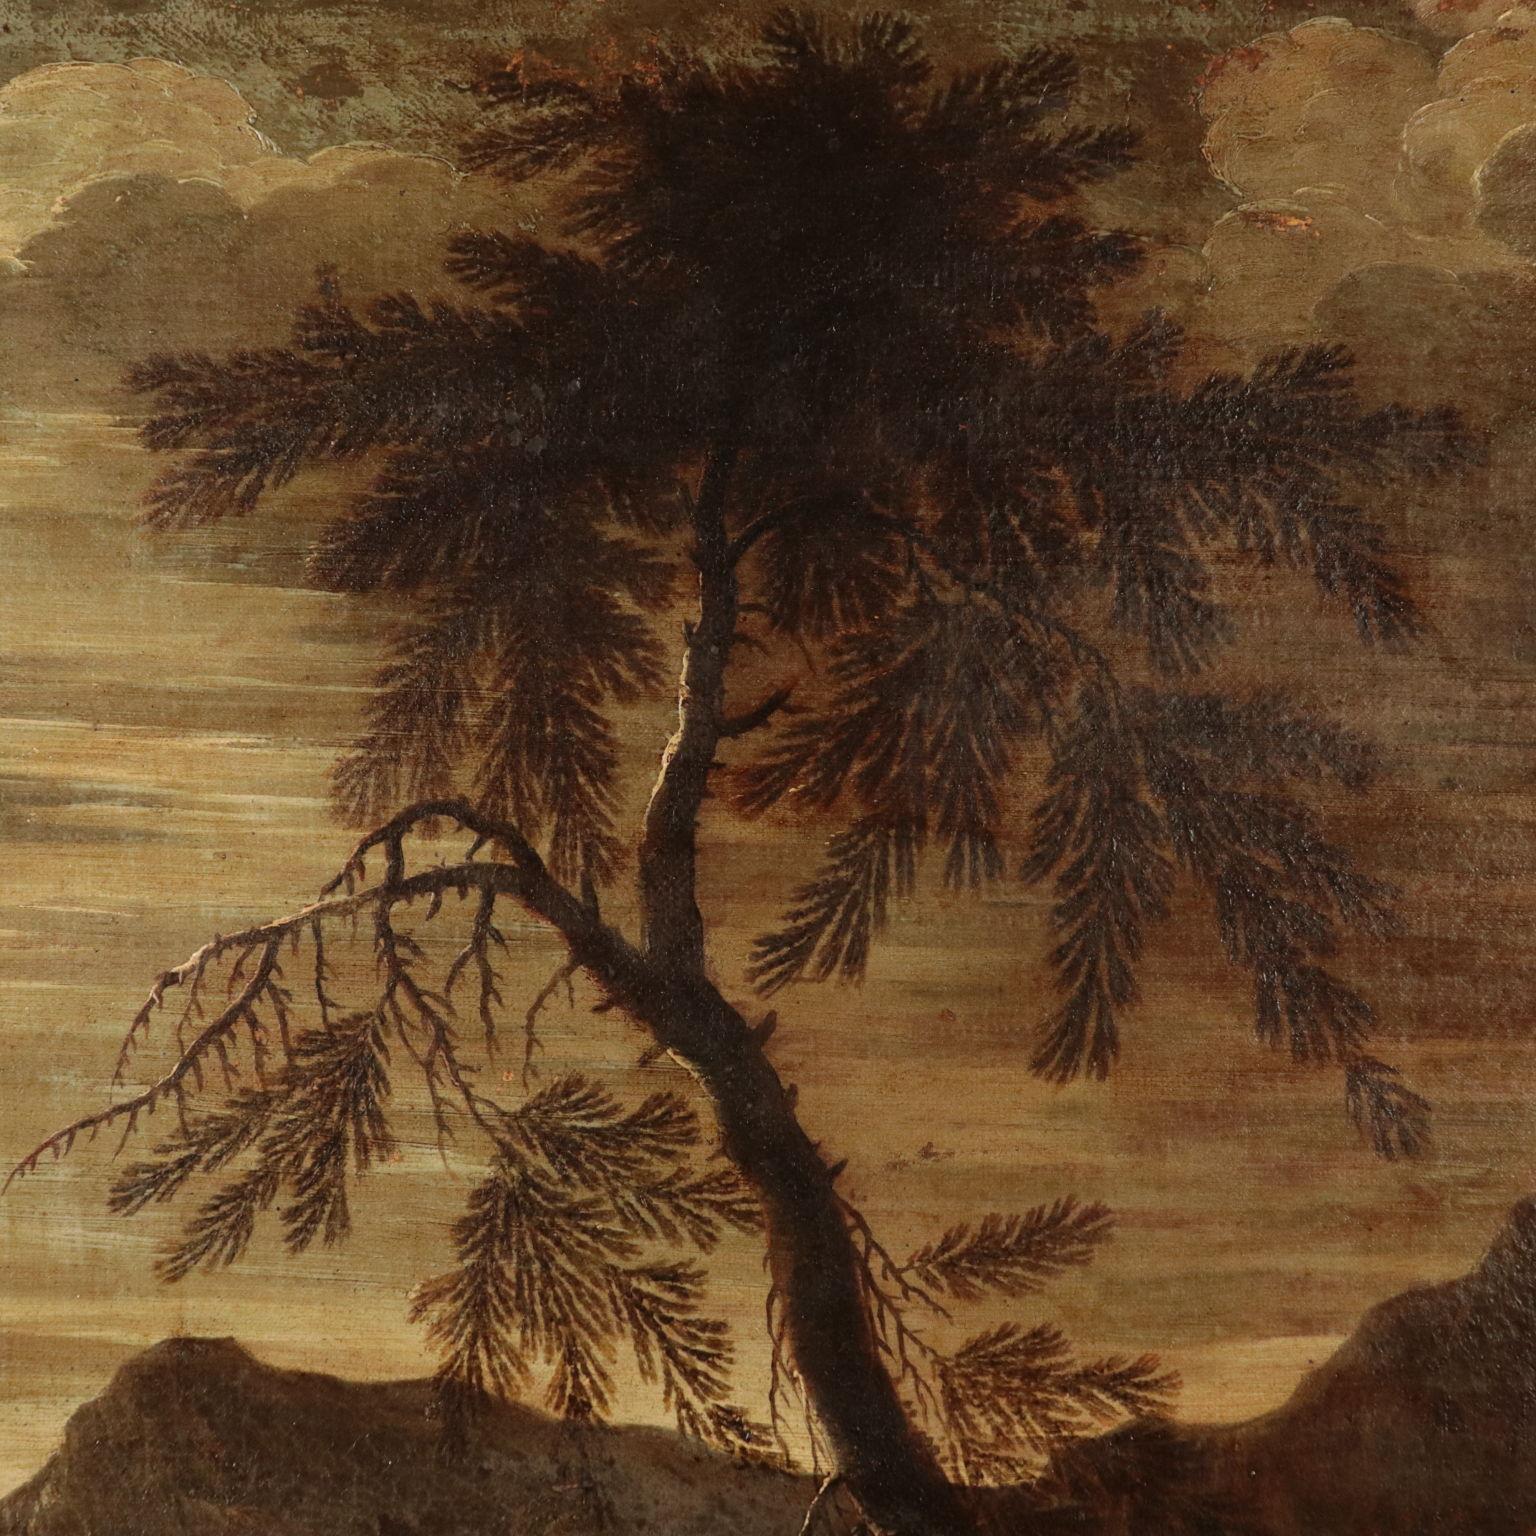 Landscape with Figures, Oil on Canvas, Italian School 17th Century - Brown Landscape Painting by Unknown